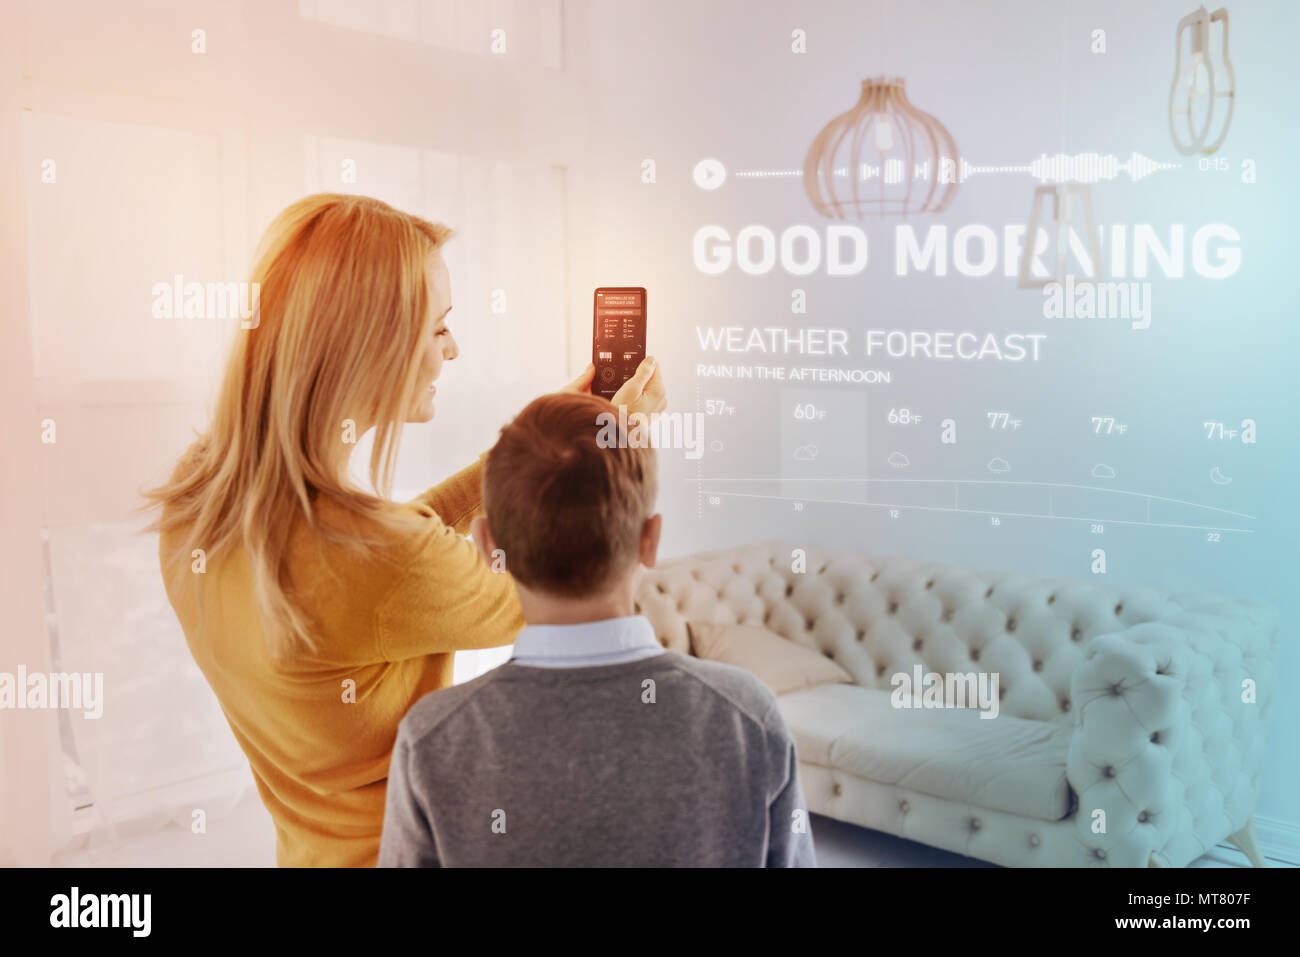 Cheerful woman smiling while checking weather forecast Stock Photo